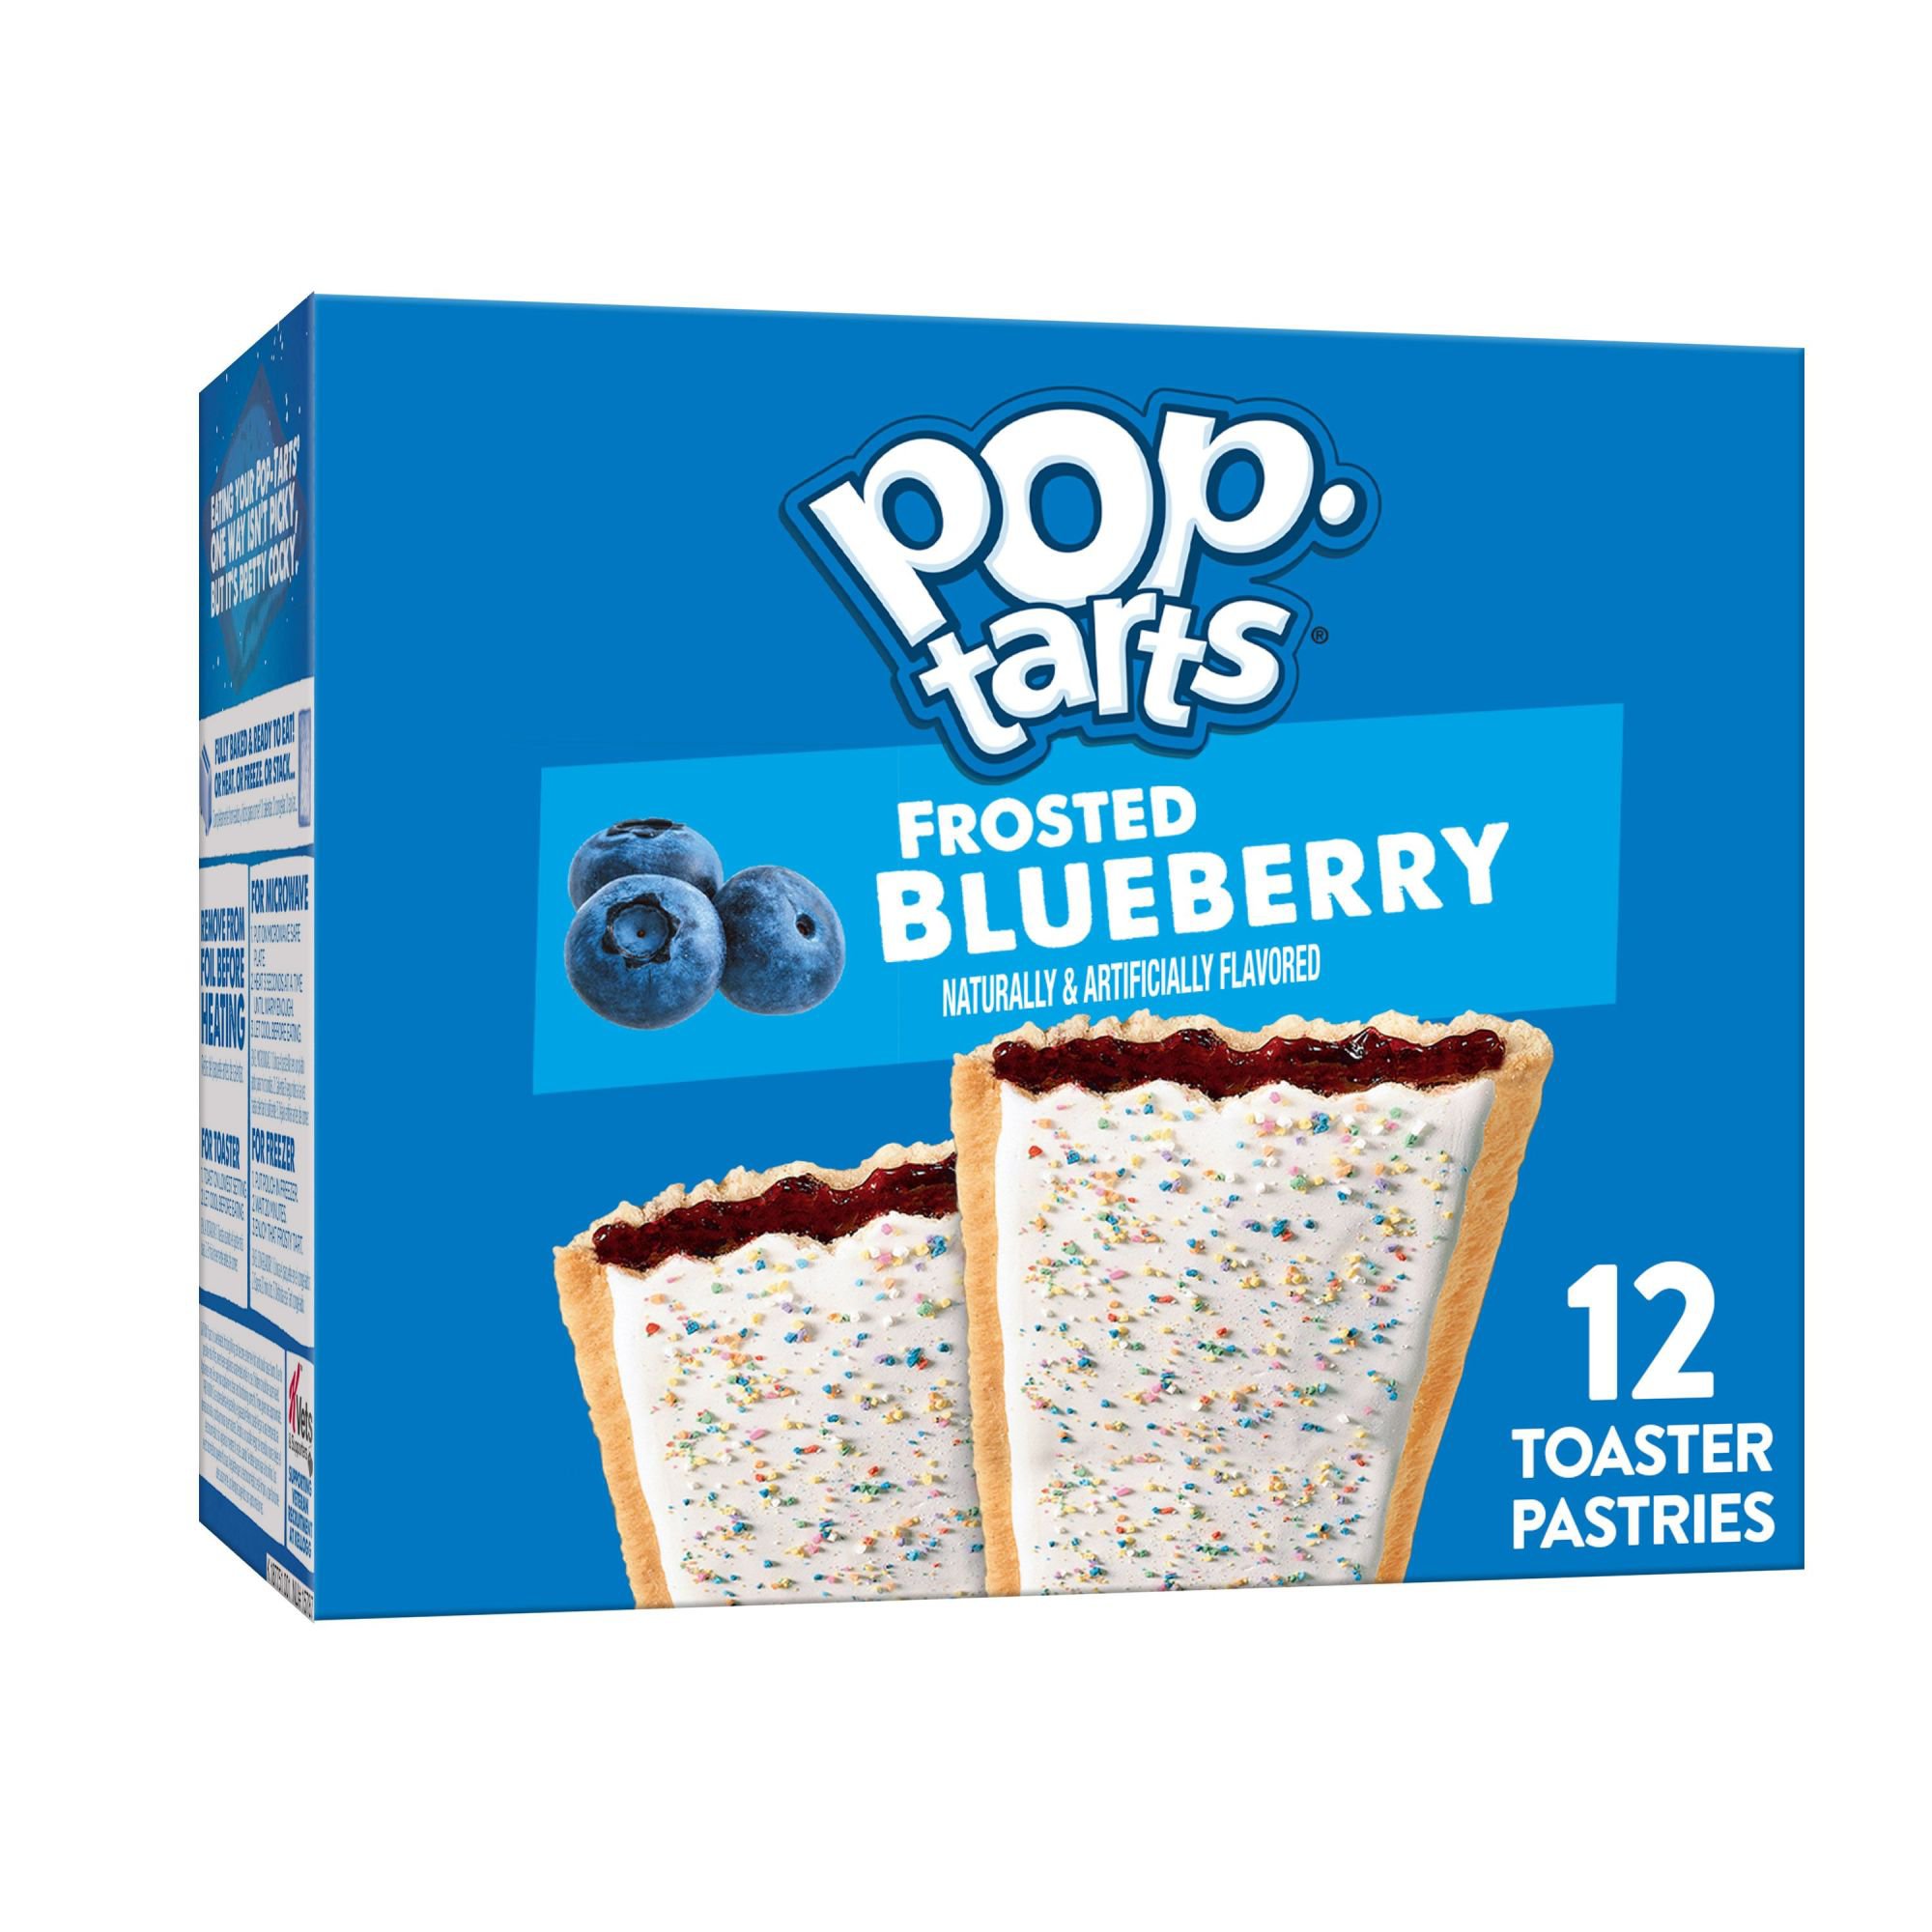 Blueberry Toaster Pastries - Toaster Pastries at H-E-B